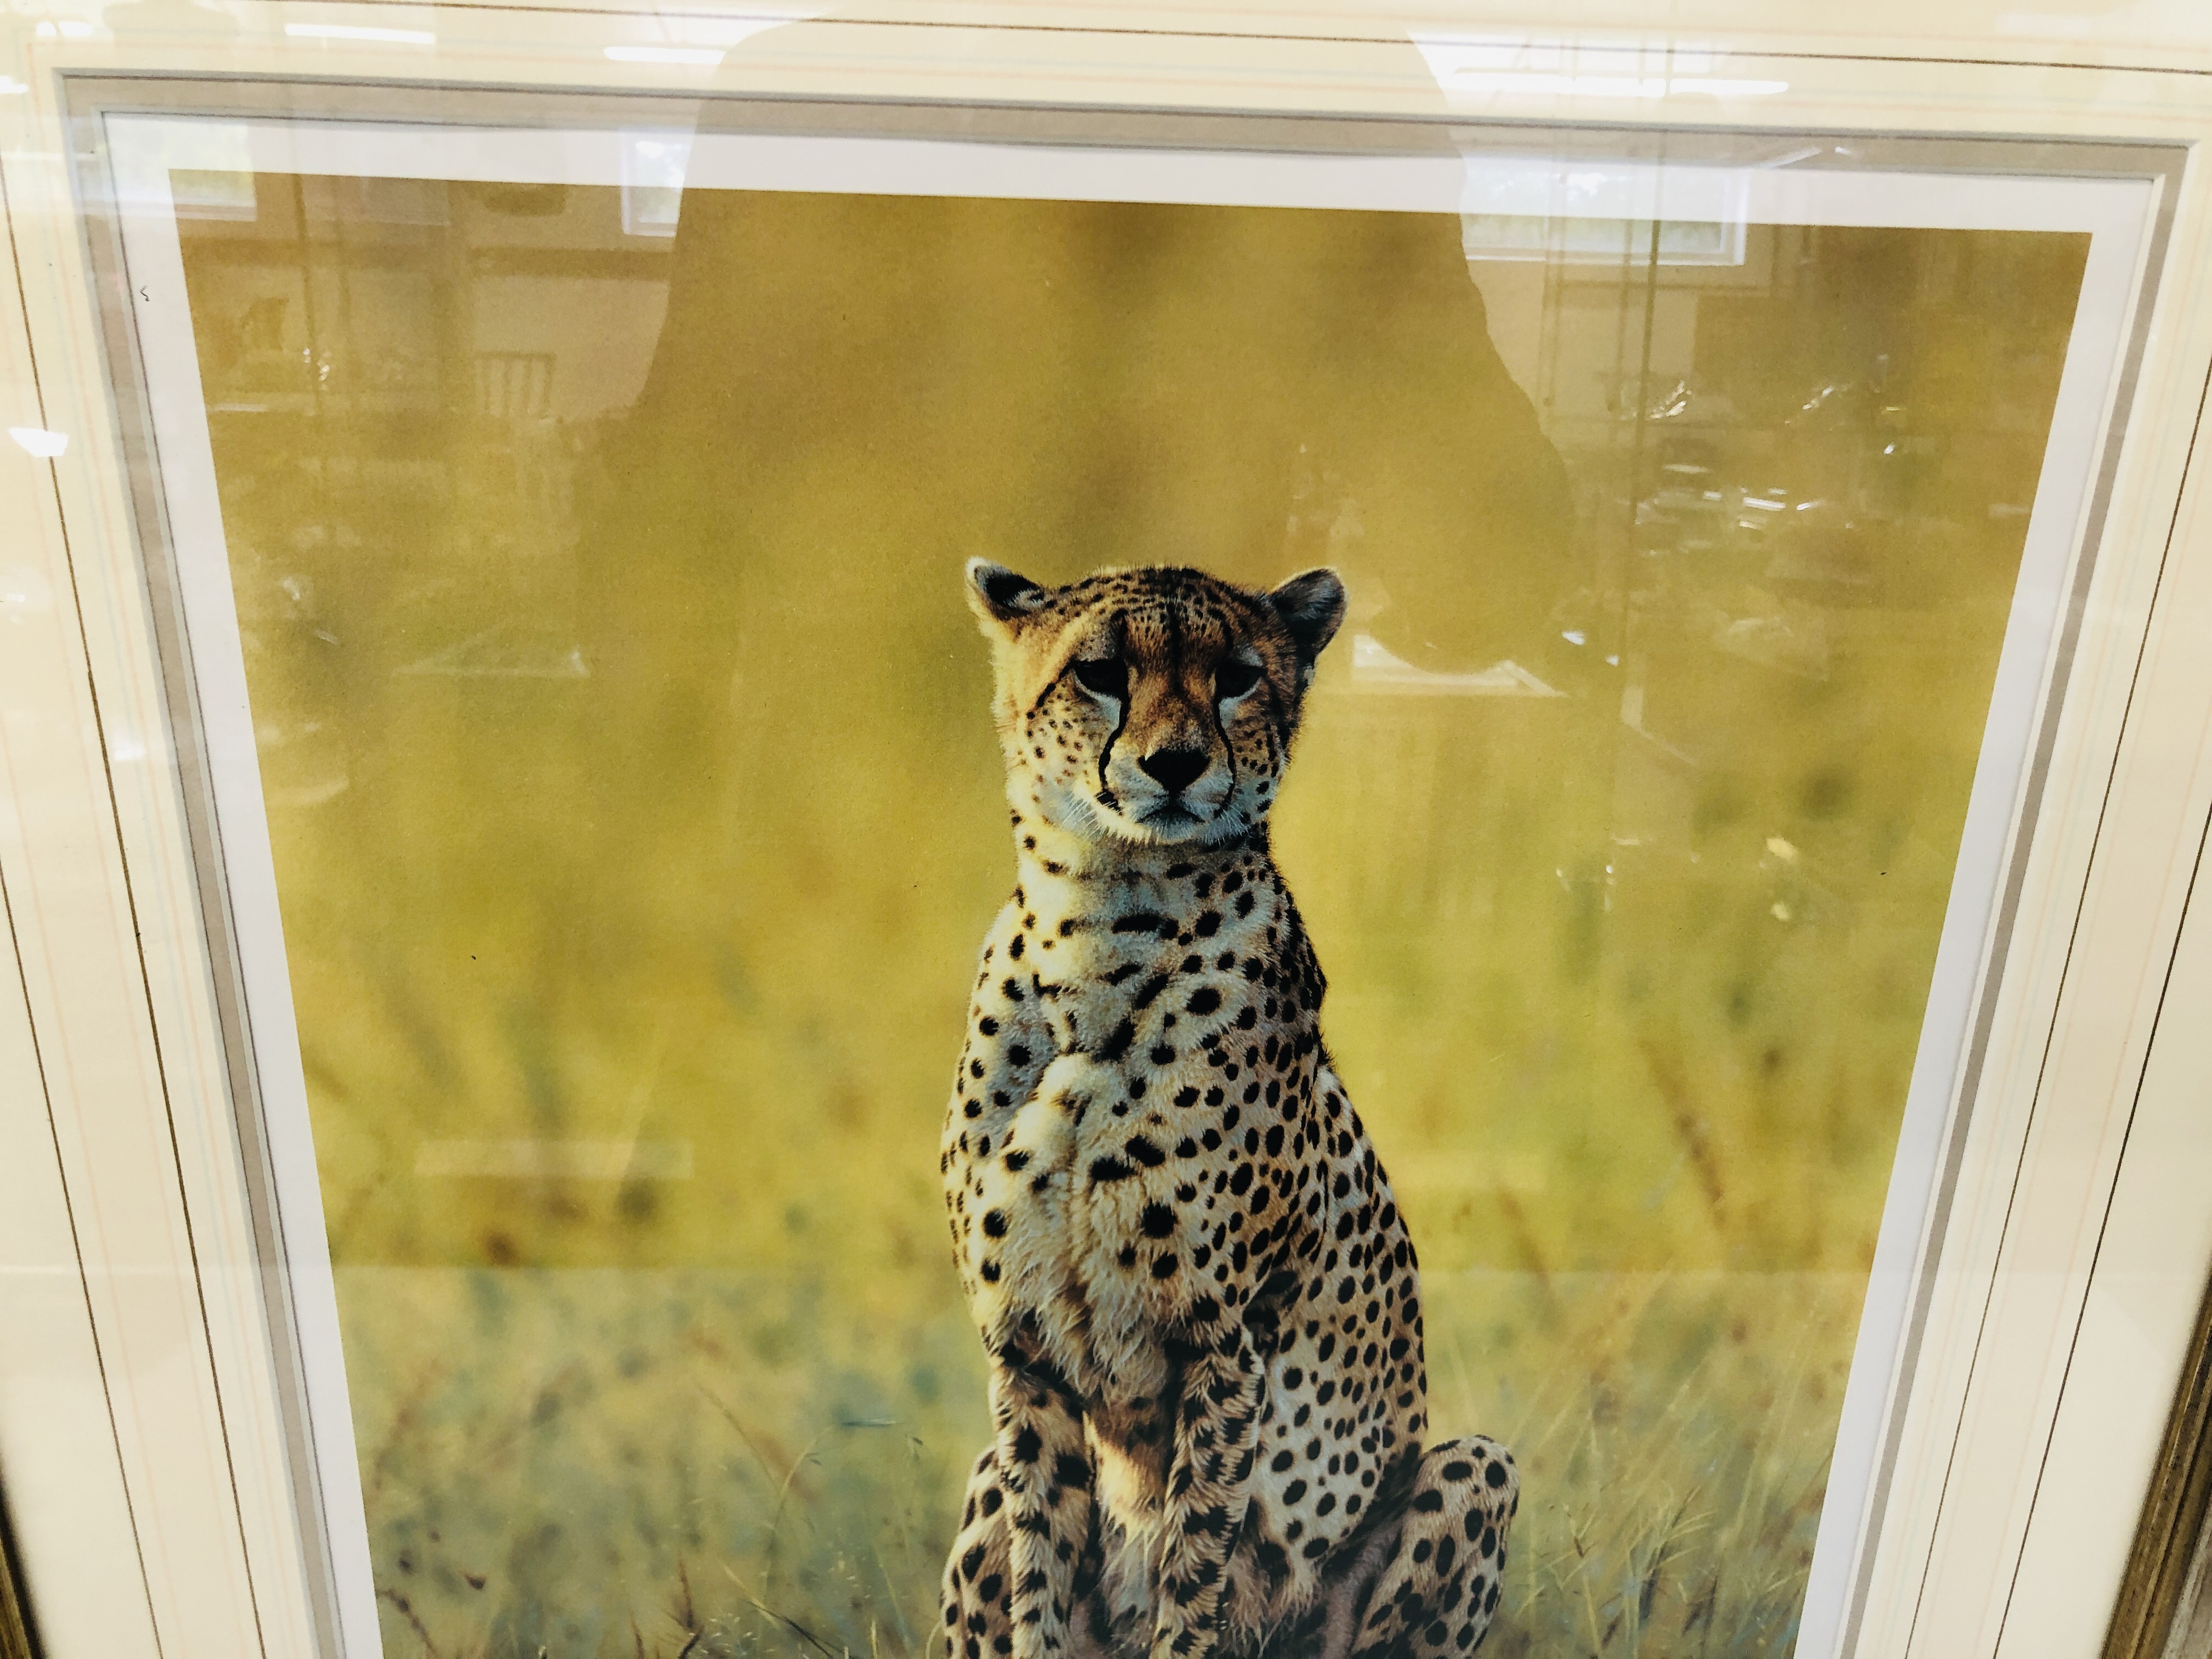 A LIMITED EDITION FRAMED PRINT OF A CHEETAH 344/675 SIGNED STEVEN TOWNSEND. - Image 2 of 3